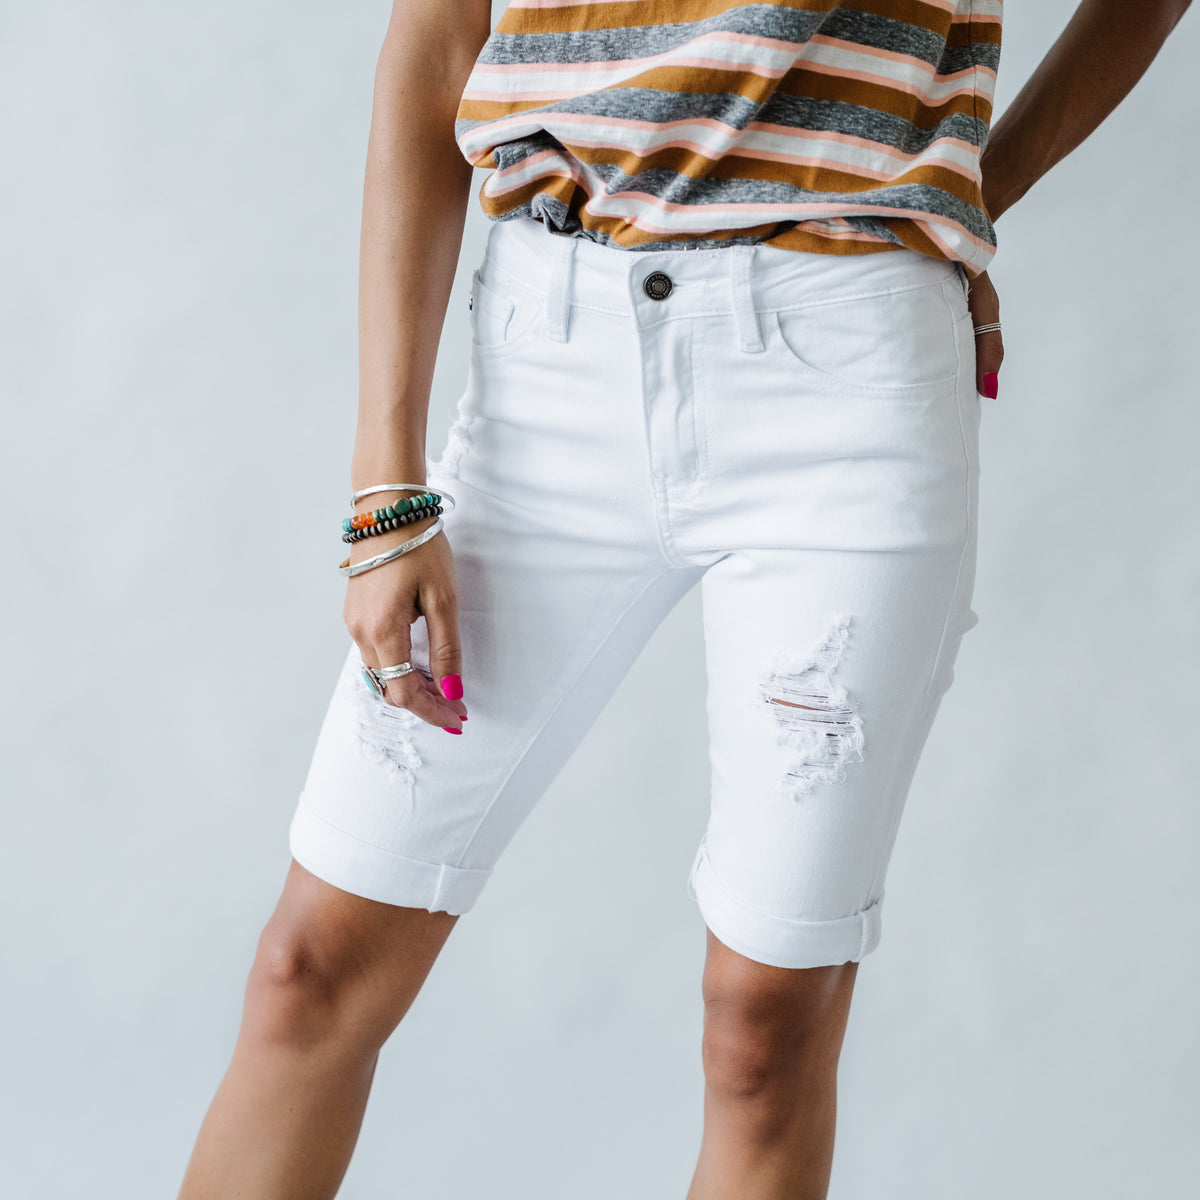 HASHTAG Shorts – White Not Alone Bermuda Kancan DNA in Distressed